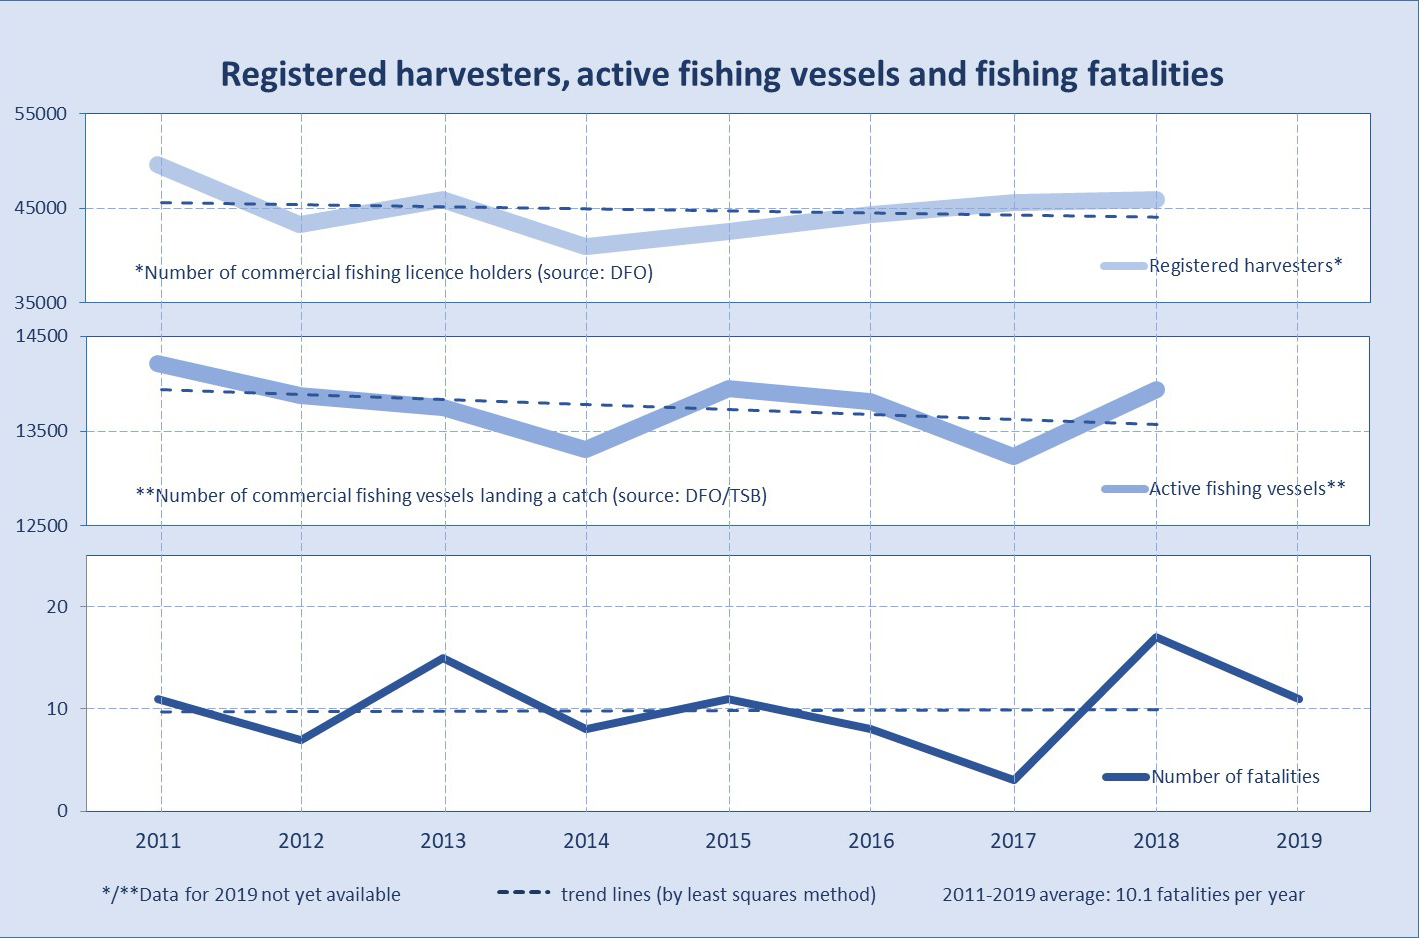 Number of registered fish harvesters, active fishing vessels, and fishing fatalities, 2011 to 2019, and the trends over time